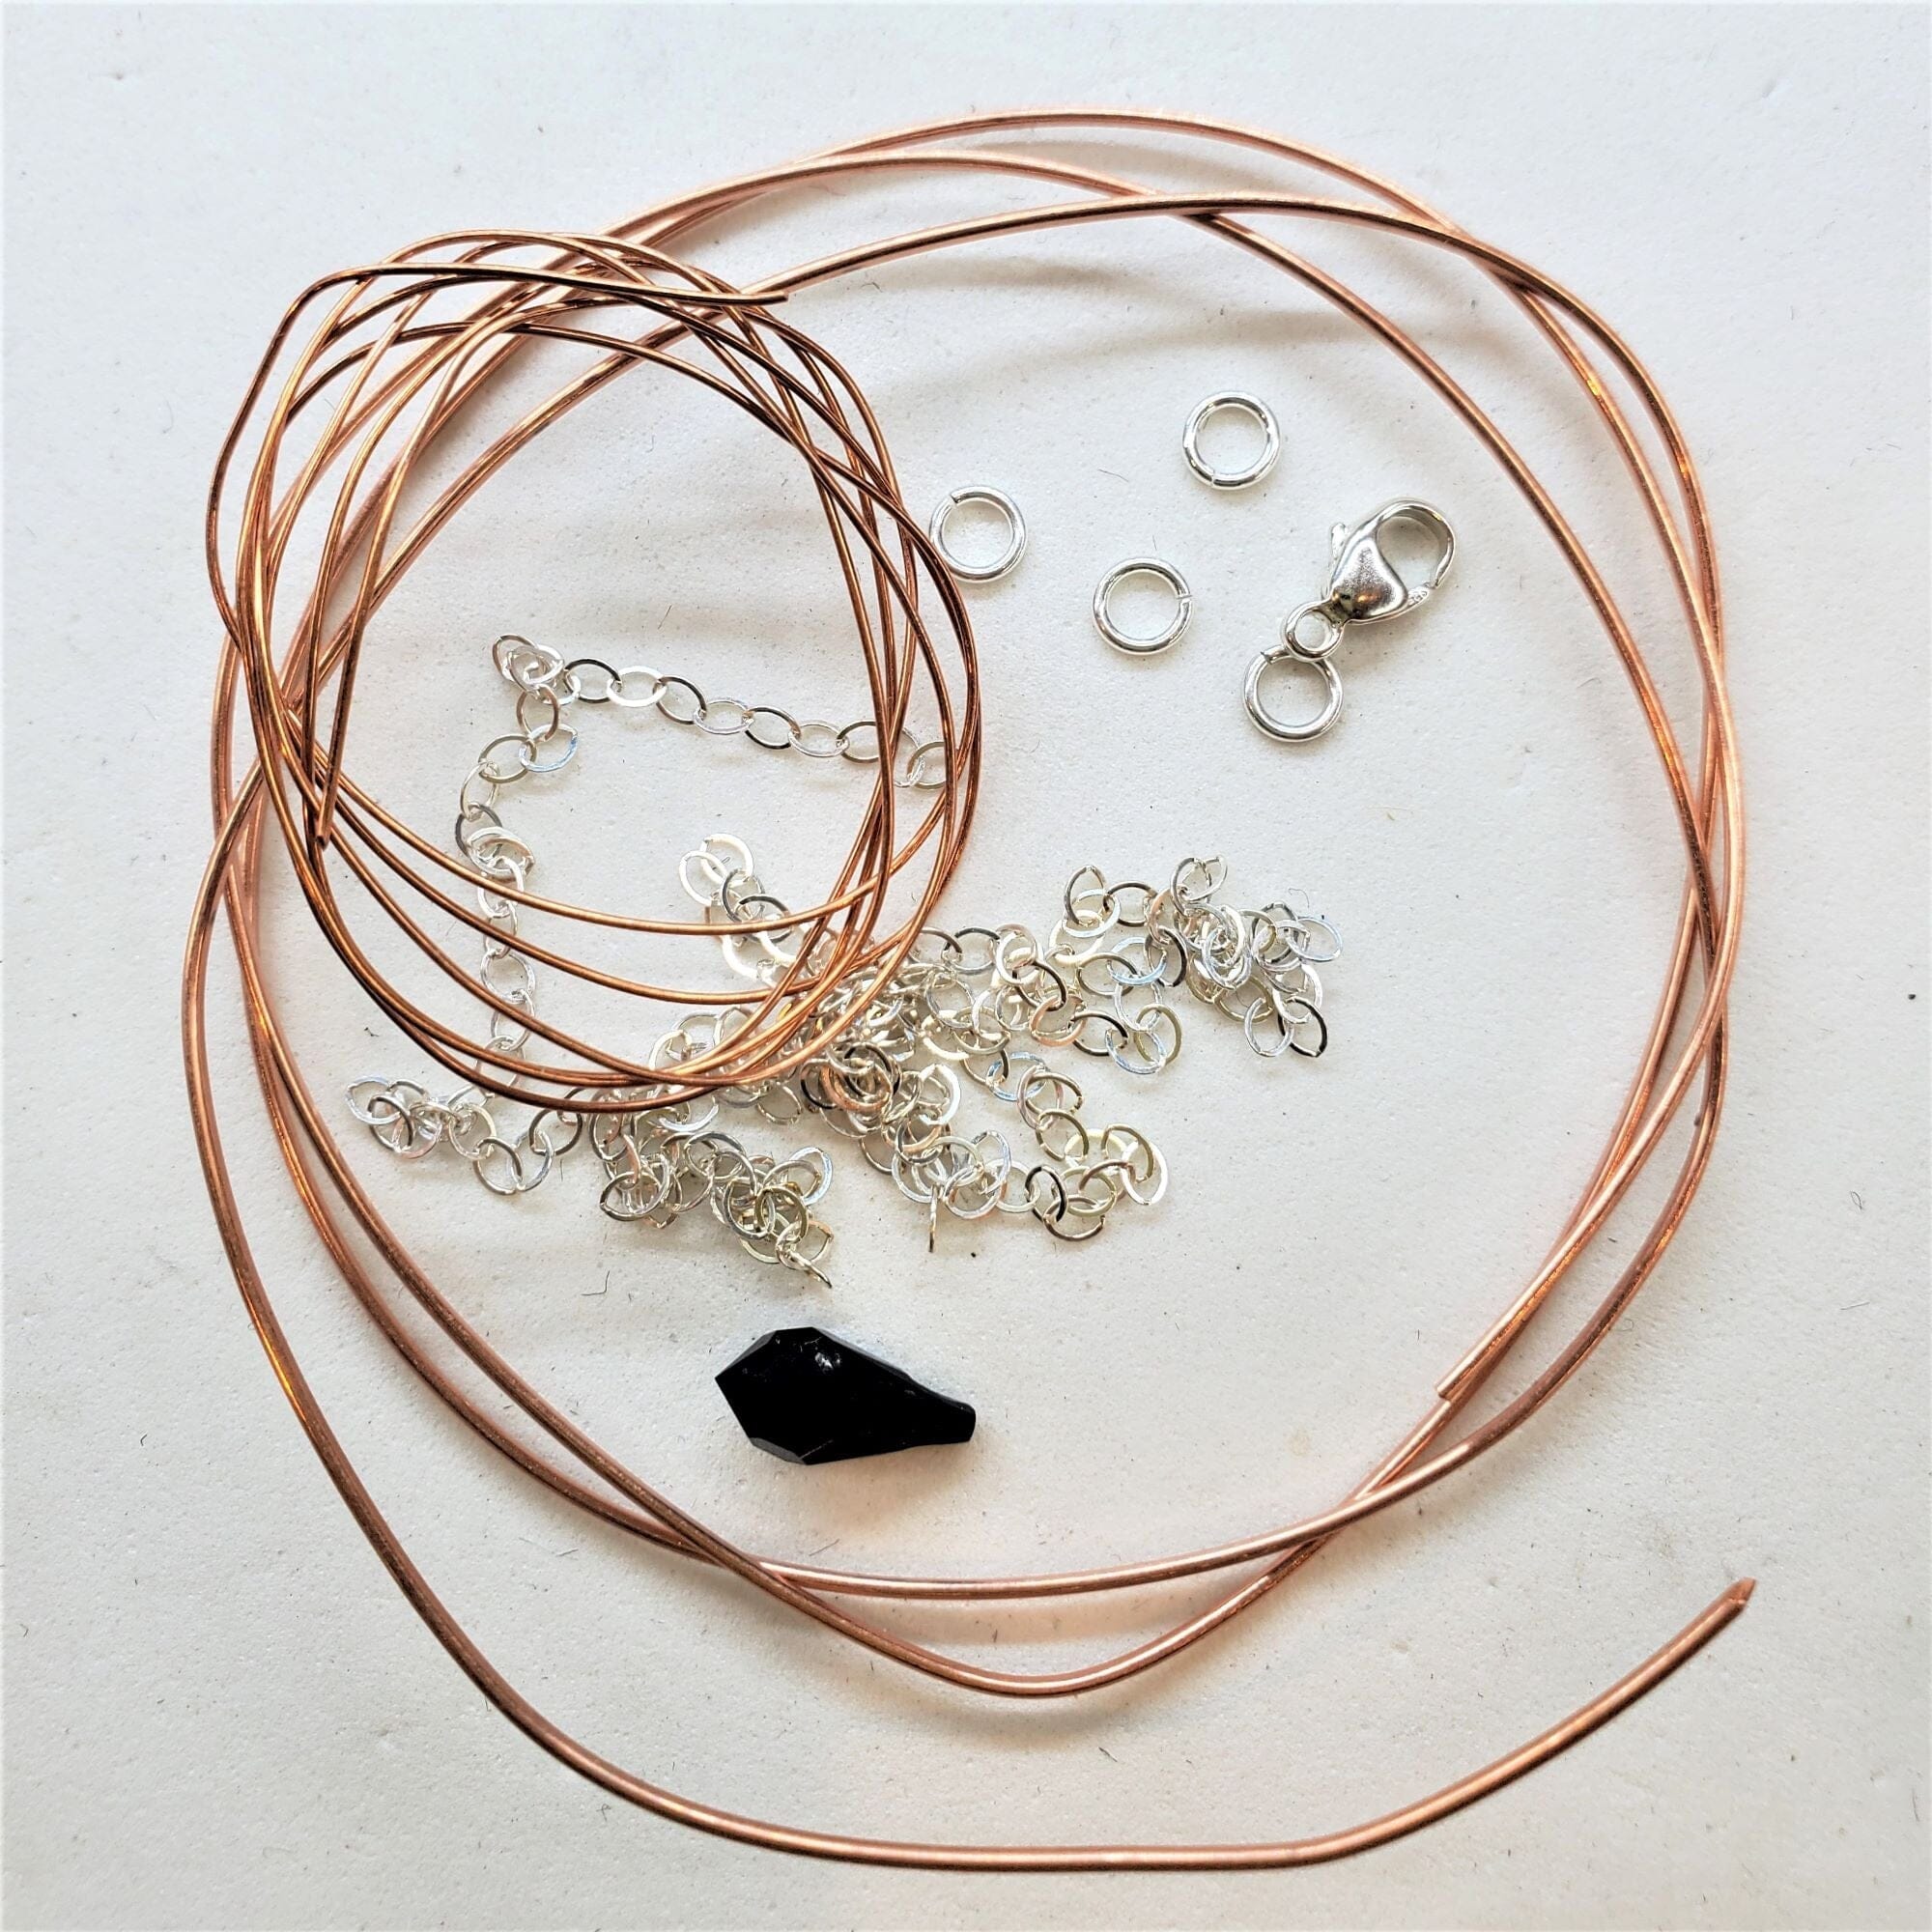 Give a Jewelry Making Kit - Simple Practical Beautiful